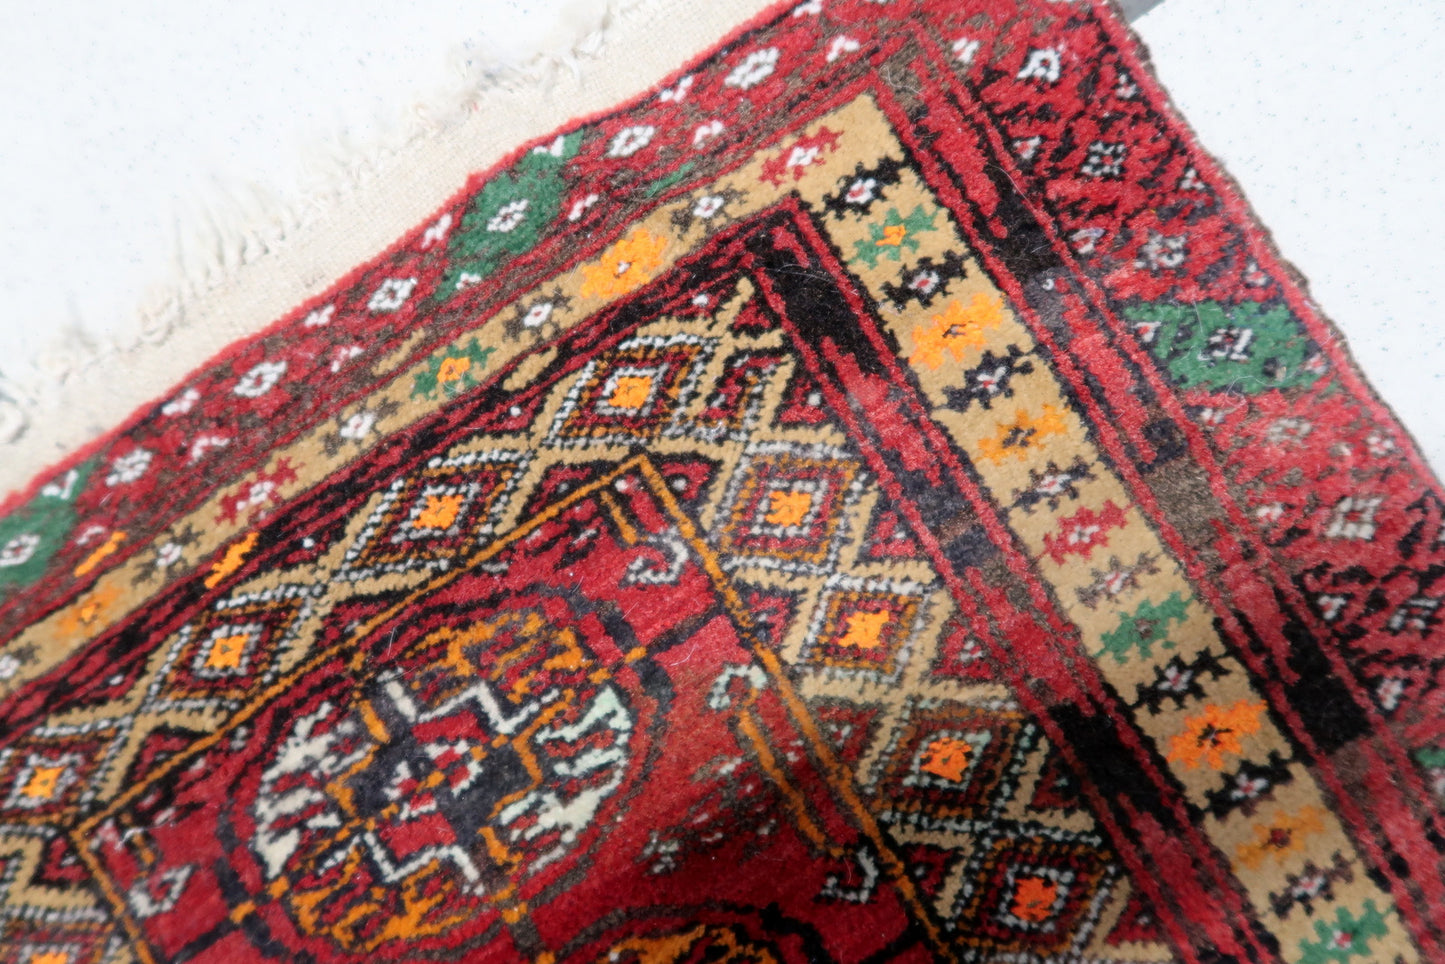 Close-up of intricate patterns and vibrant colors on the vintage Afghan Ersari mat